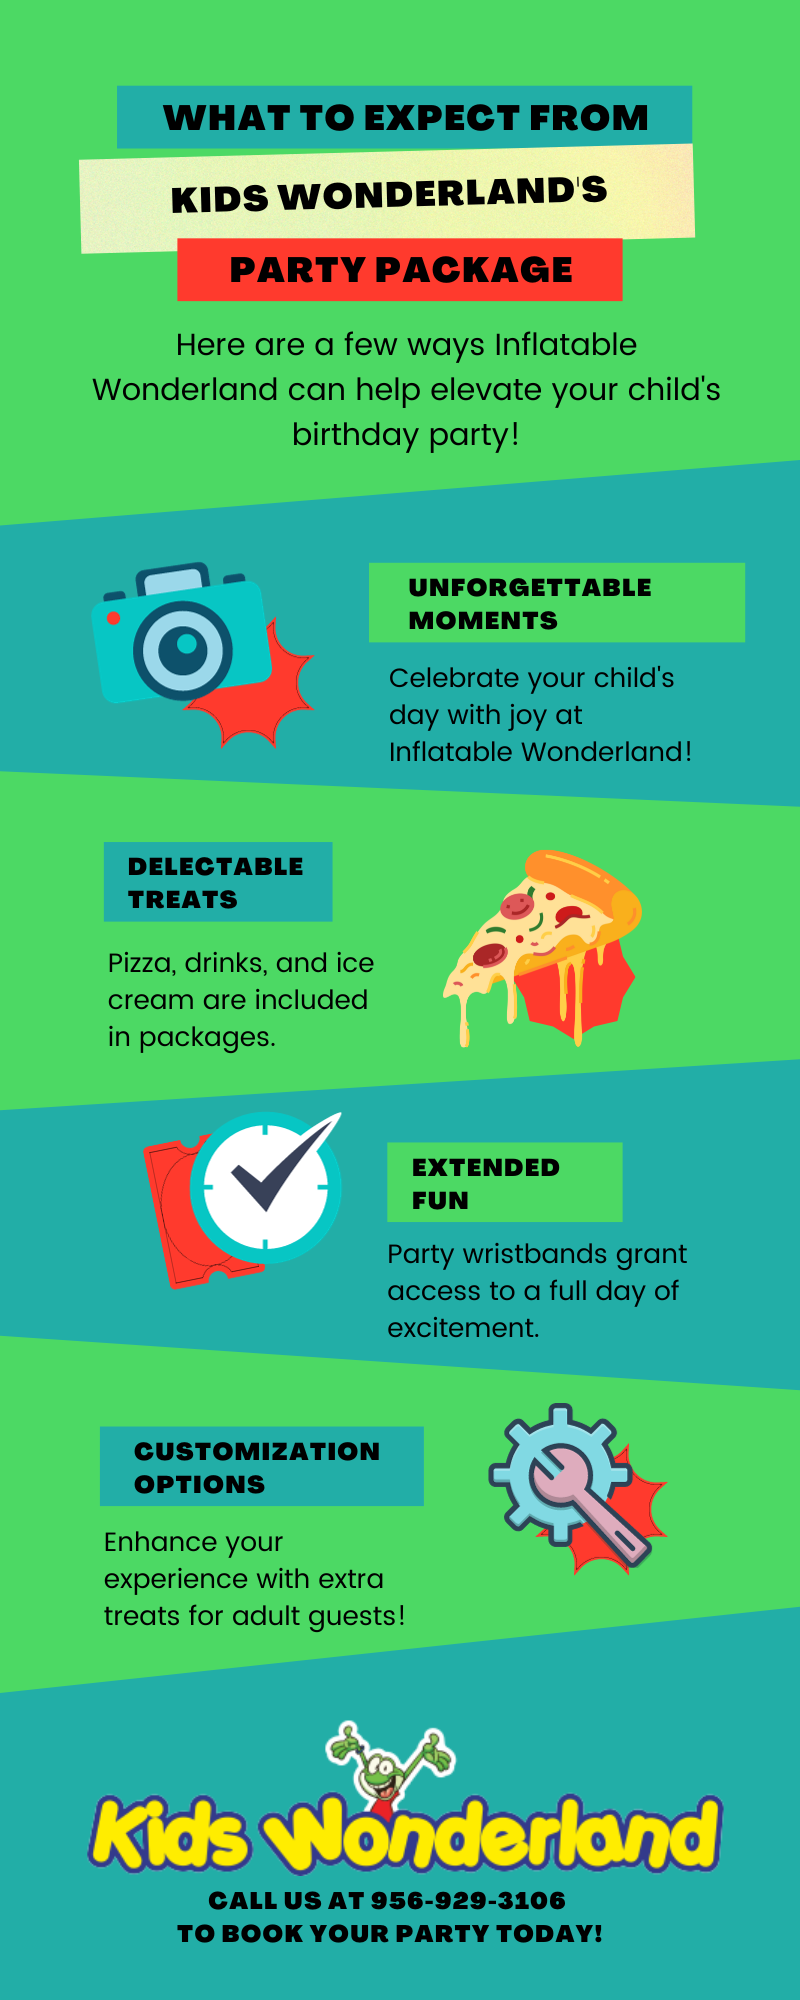 M36489 - McAllen Infographic - What to Expect From Inflatable Wonderland's Party Package.png